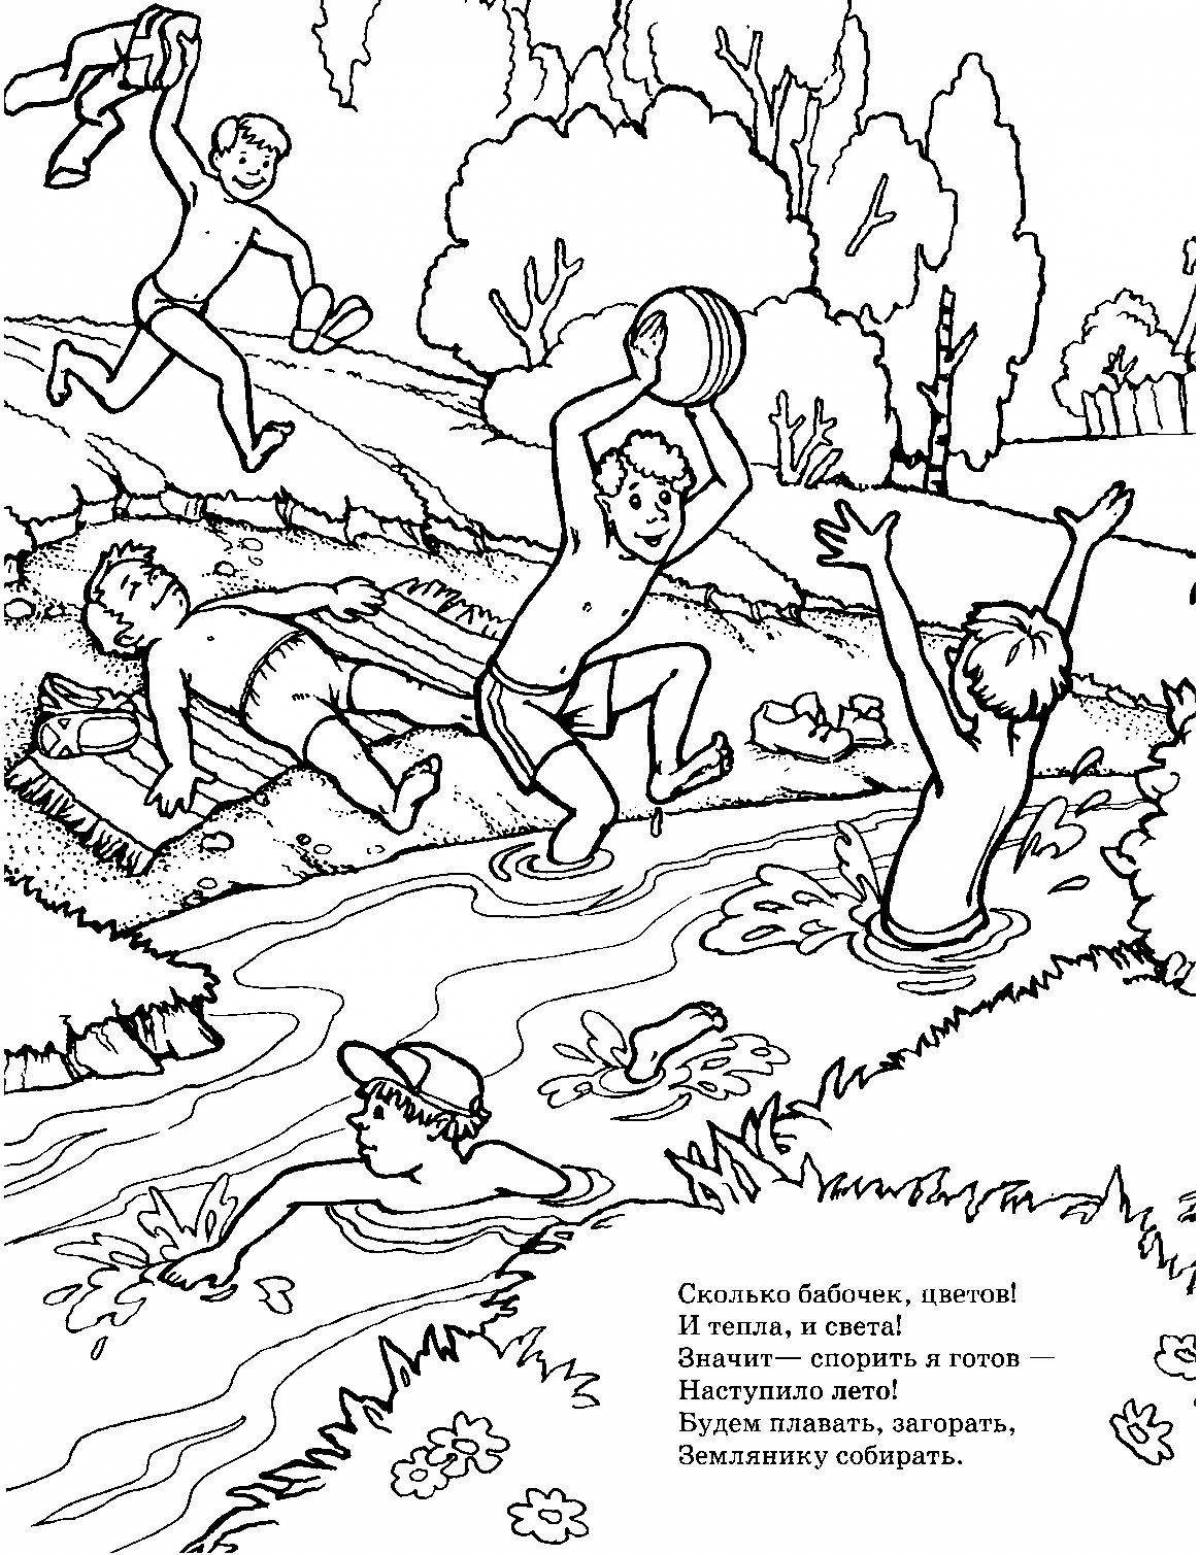 Coloring page stimulating water safety